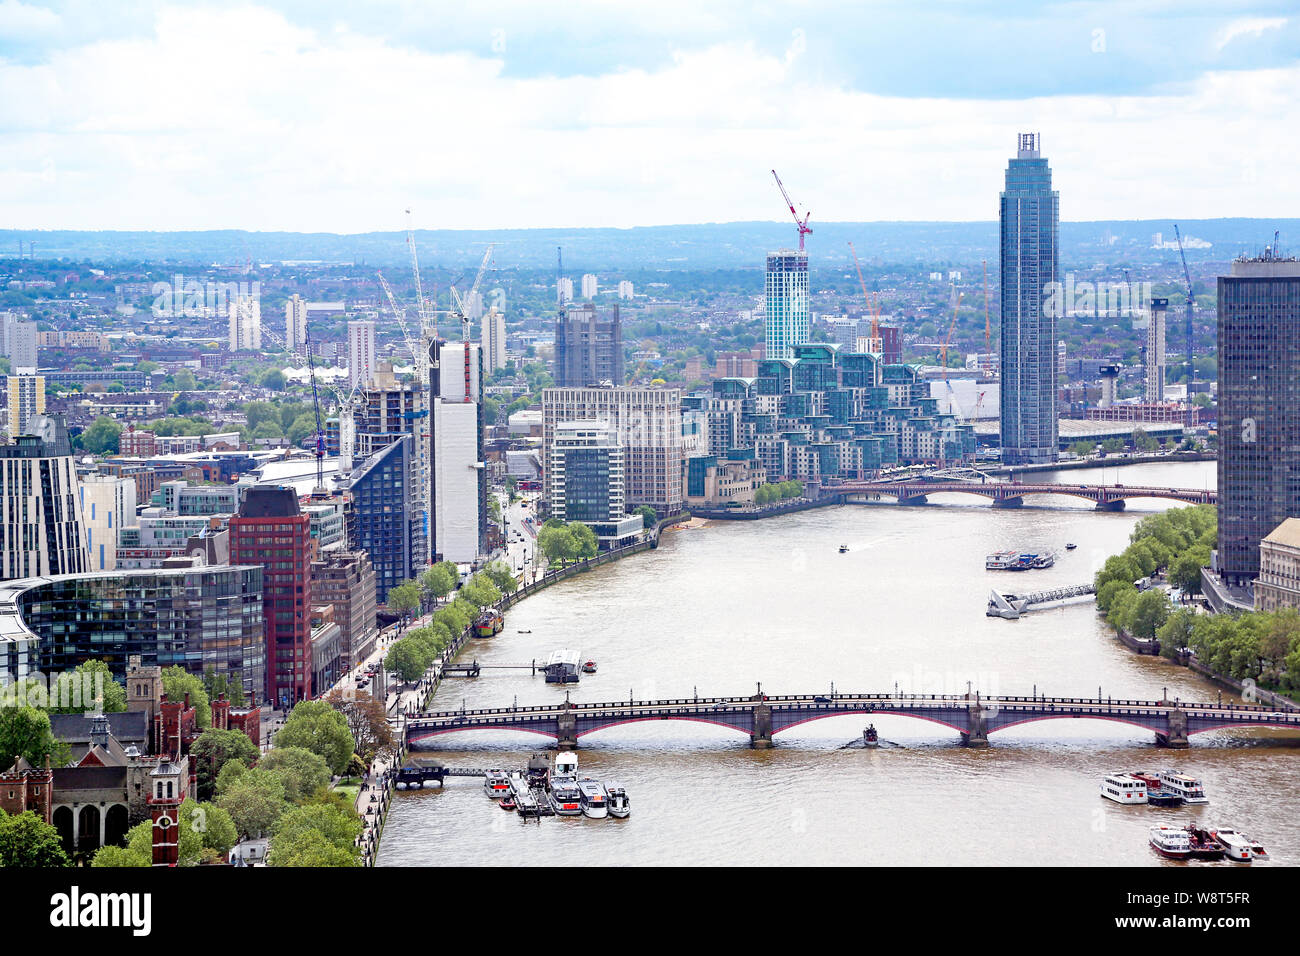 London, Great Britain -May 22, 2016: London cityscape with business public buildings, view from above Stock Photo